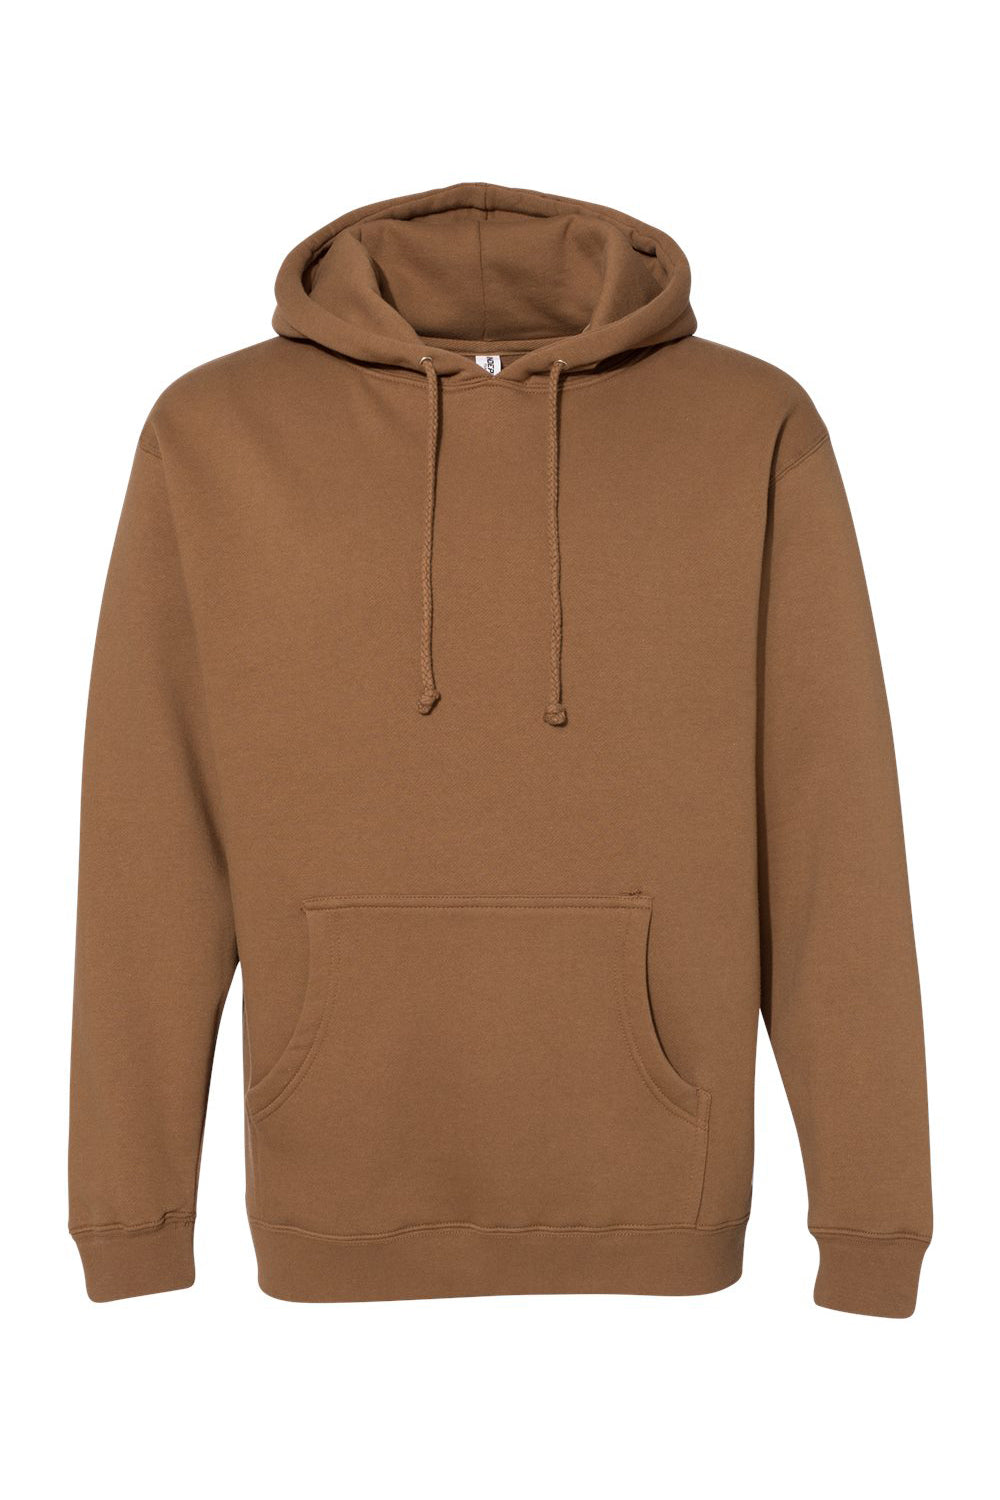 Independent Trading Co. IND4000 Mens Hooded Sweatshirt Hoodie Saddle Brown Flat Front